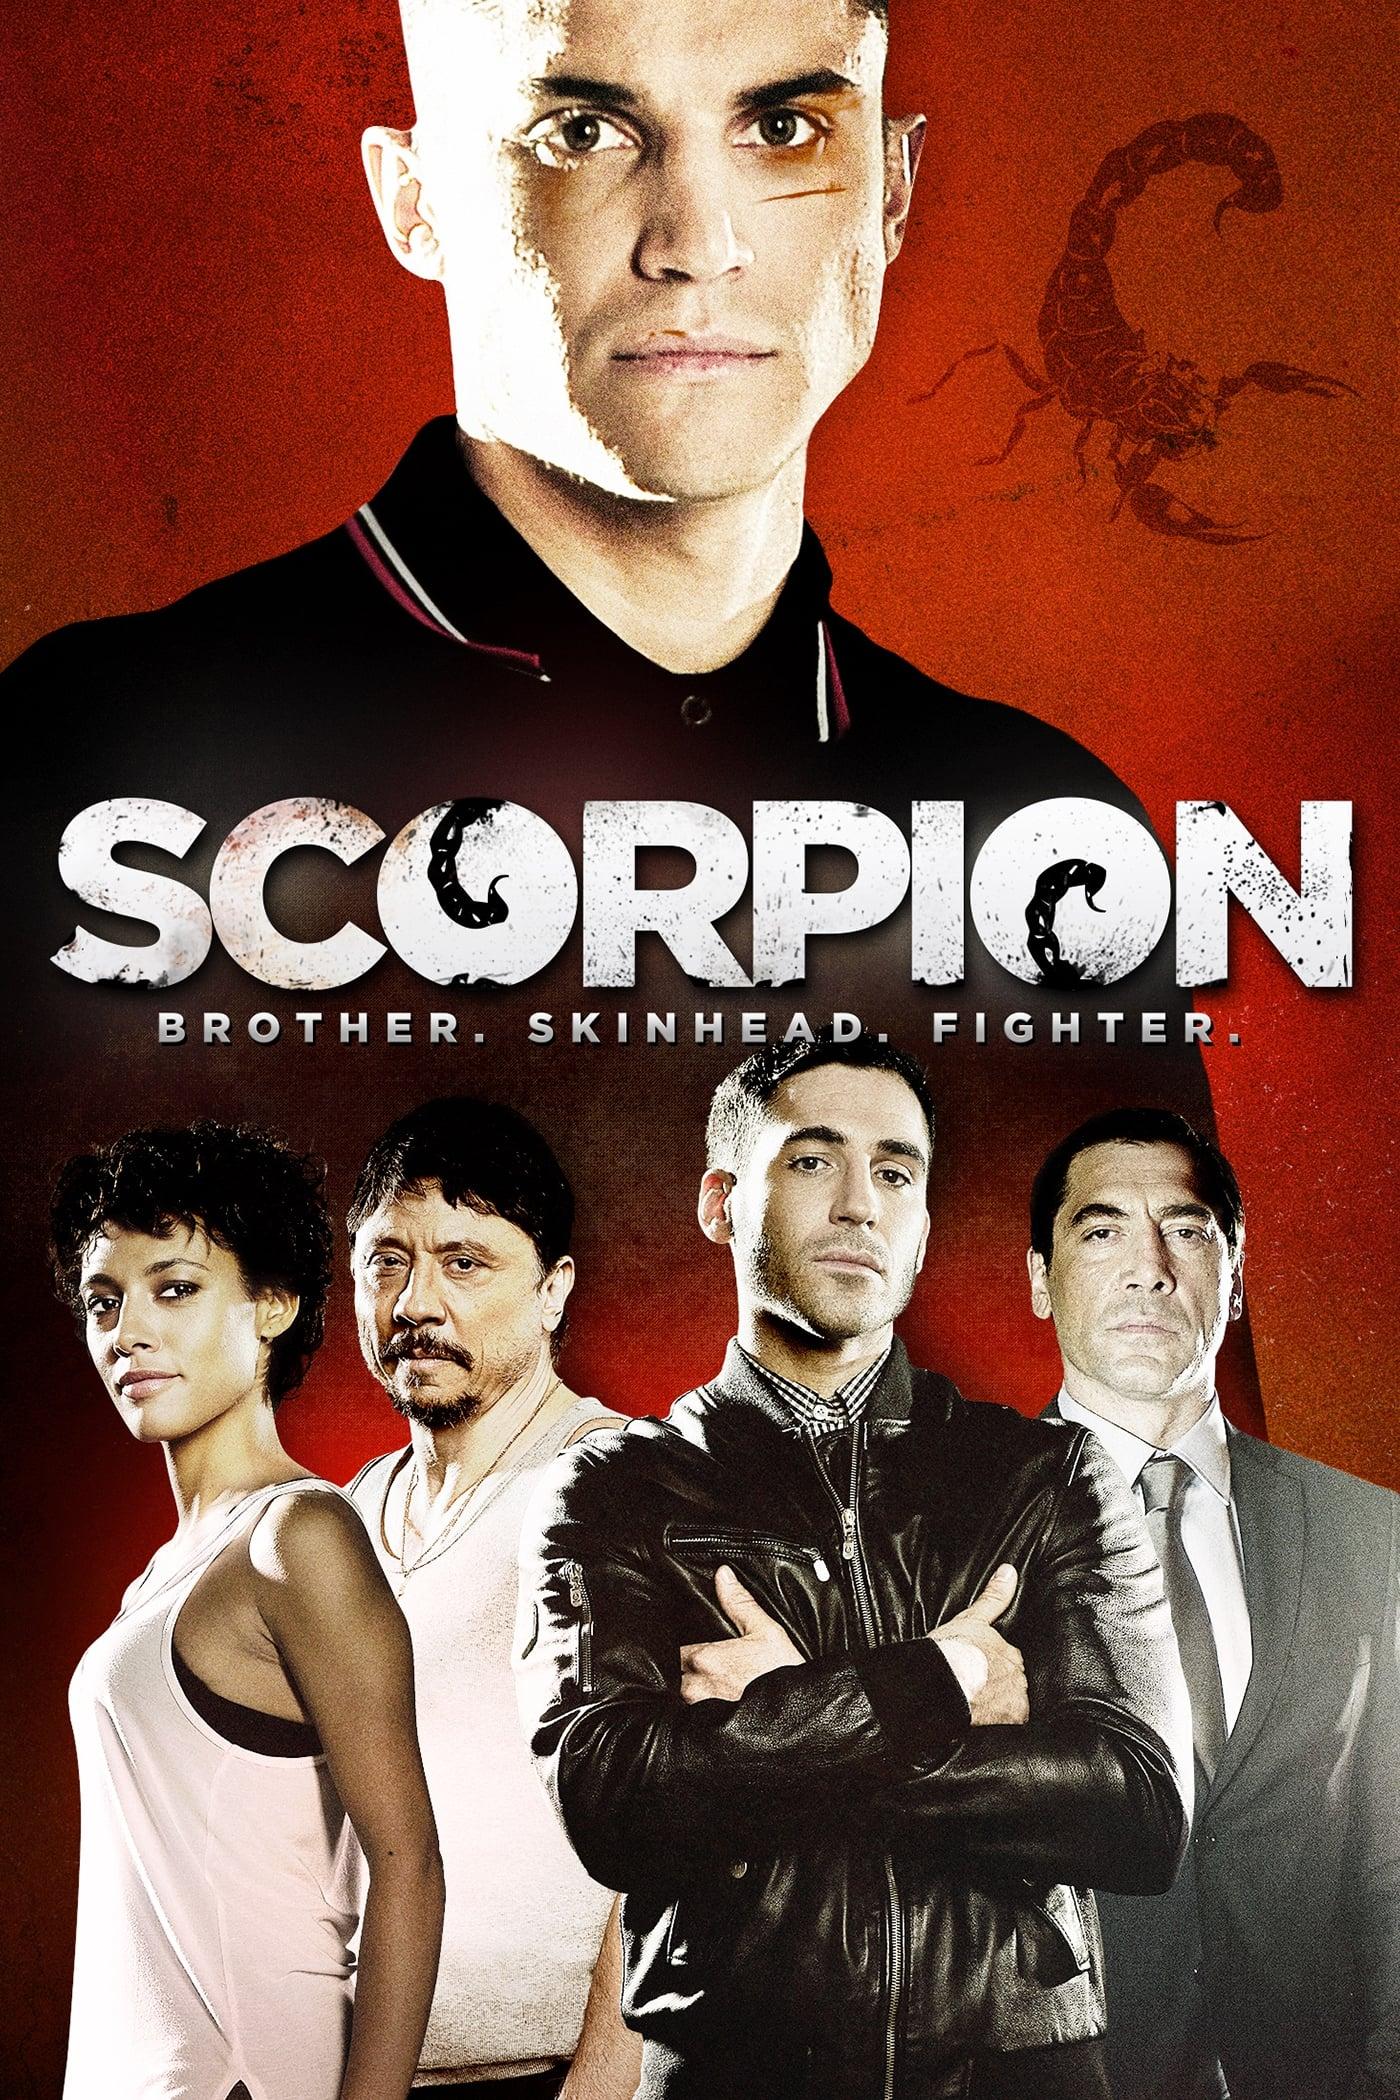 Scorpion: Brother. Skinhead. Fighter. poster